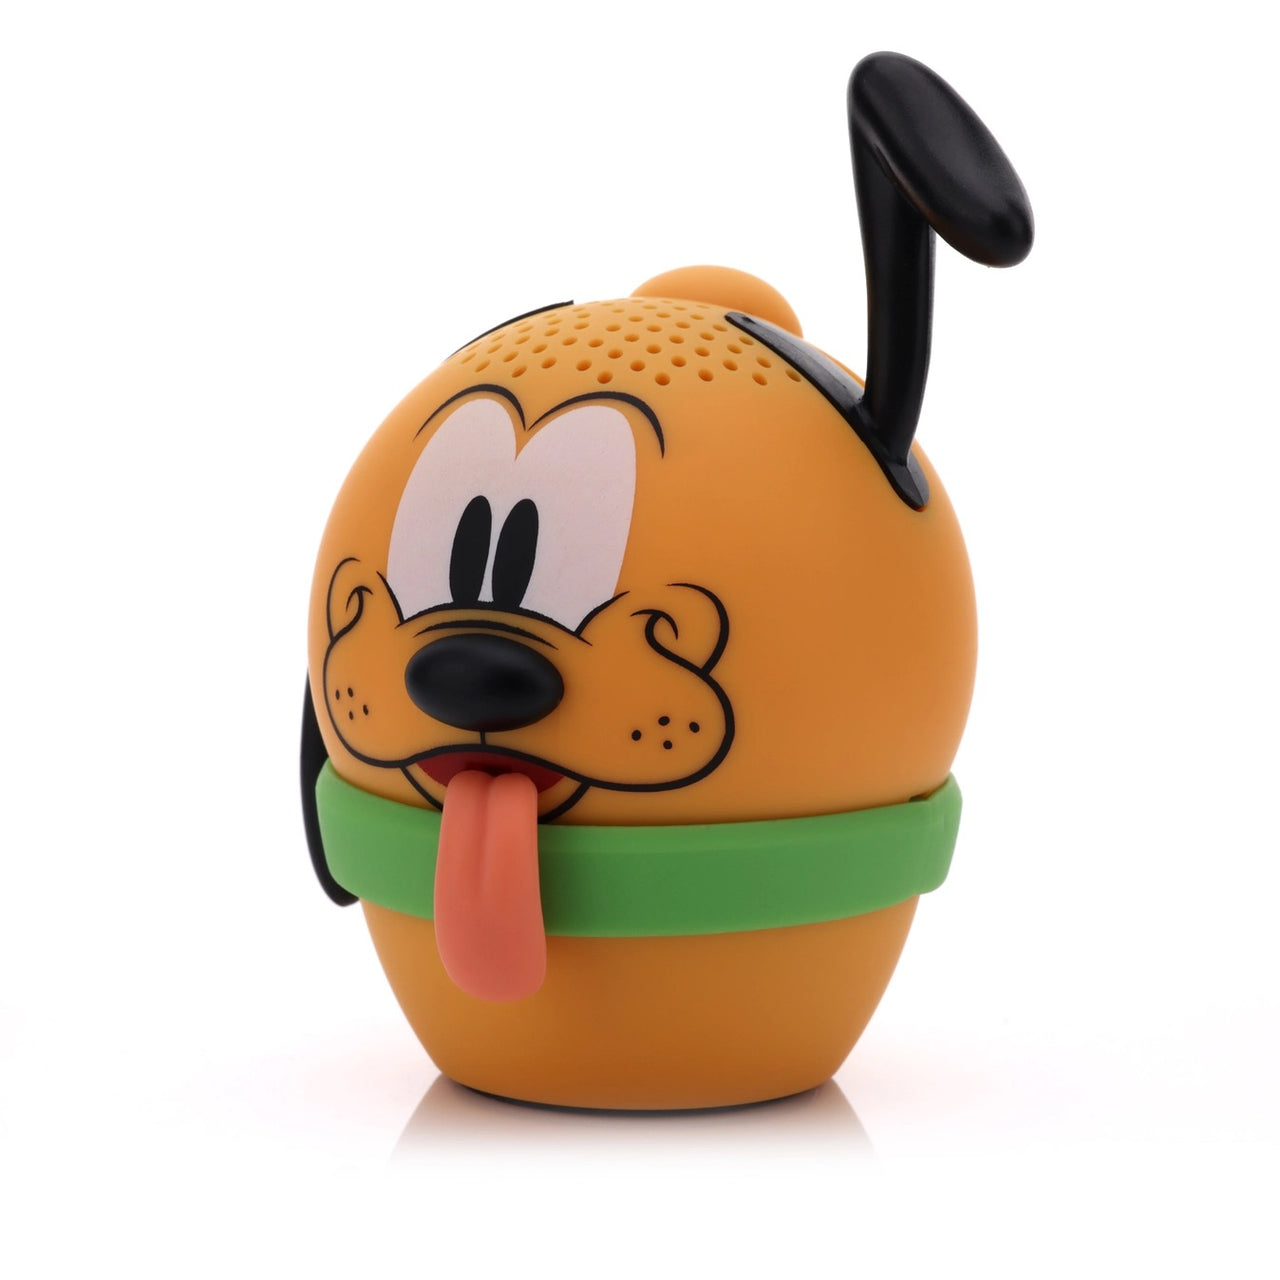 Pluto - Bitty Boomers Collectable Bluetooth Speaker